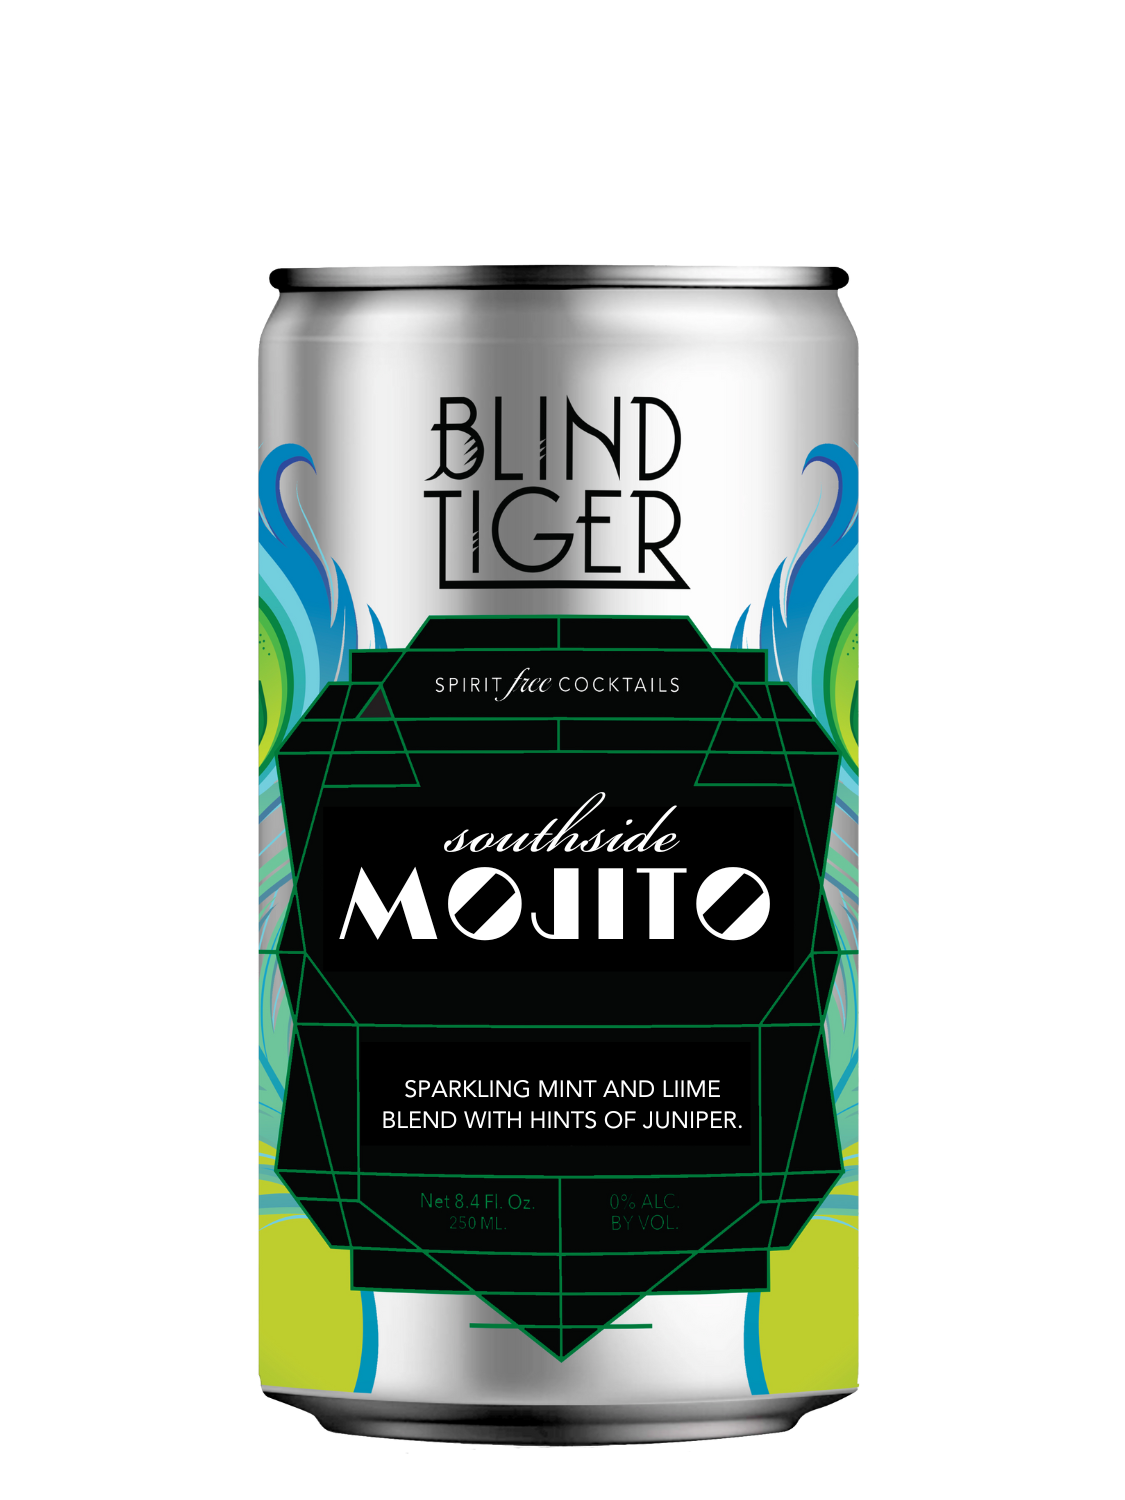 NEW Southside Mojito Slim Can 4-pack (33.6oz)